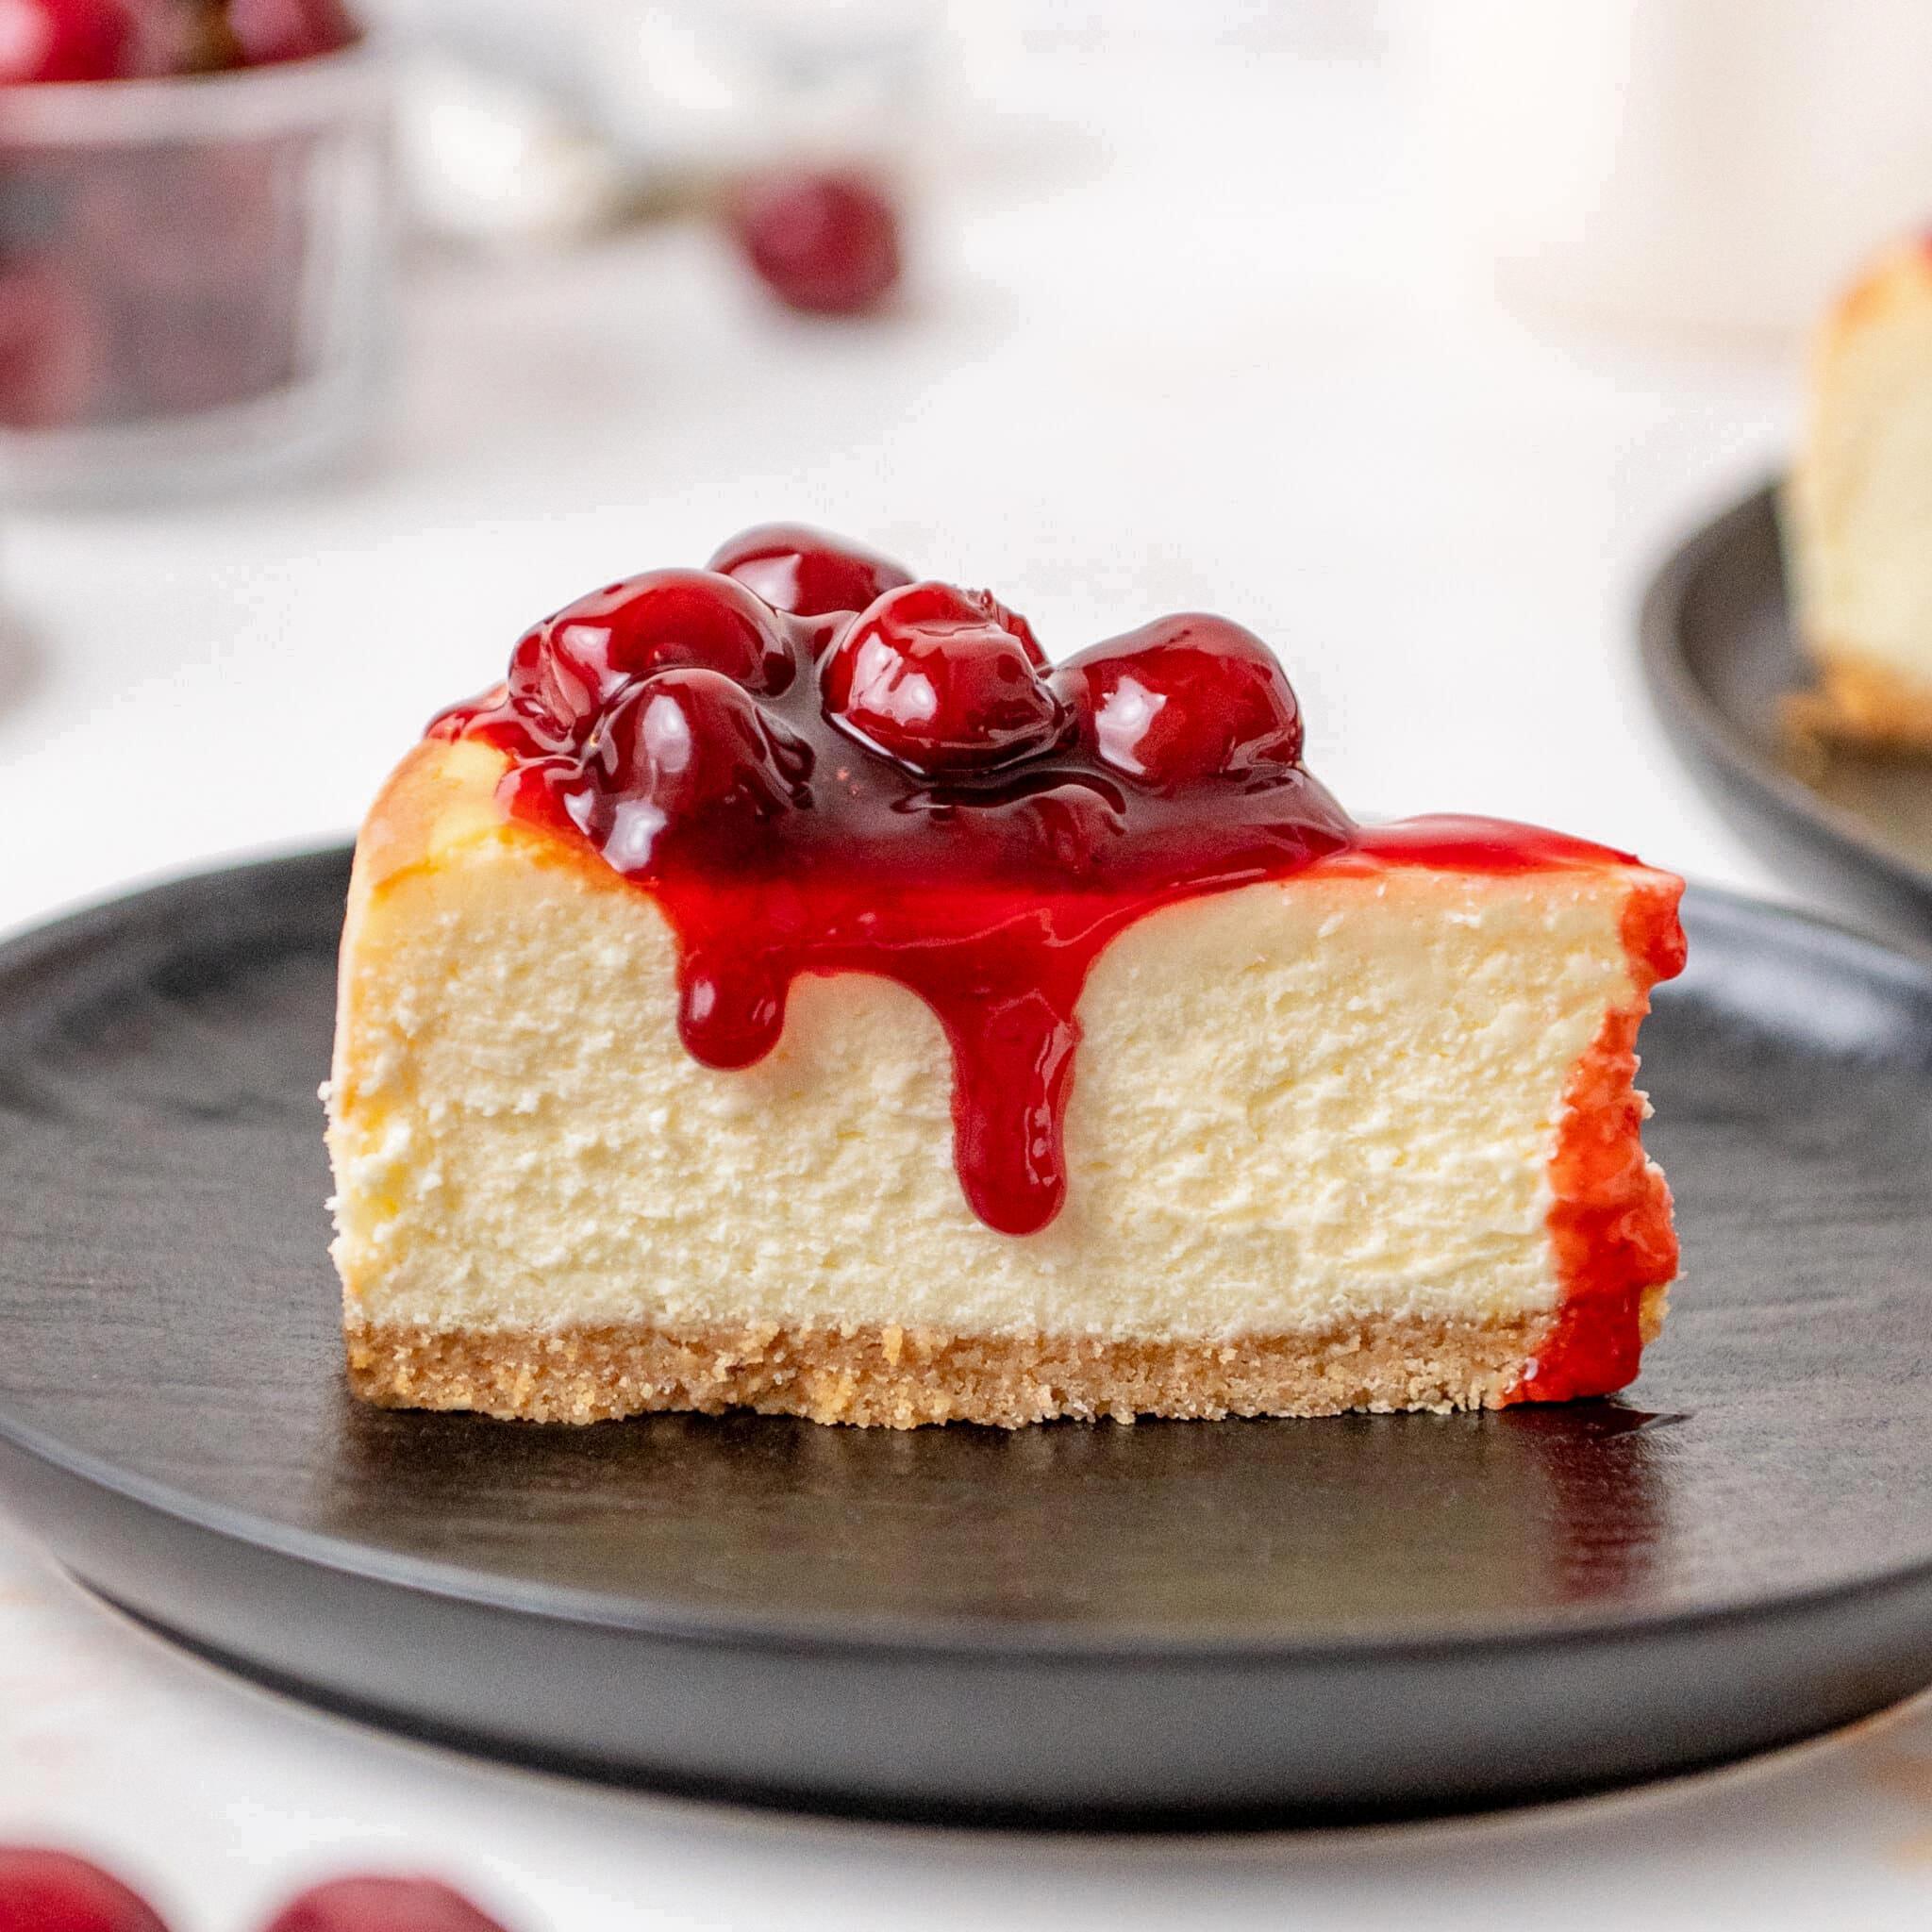 does cheesecake need to be refrigerated